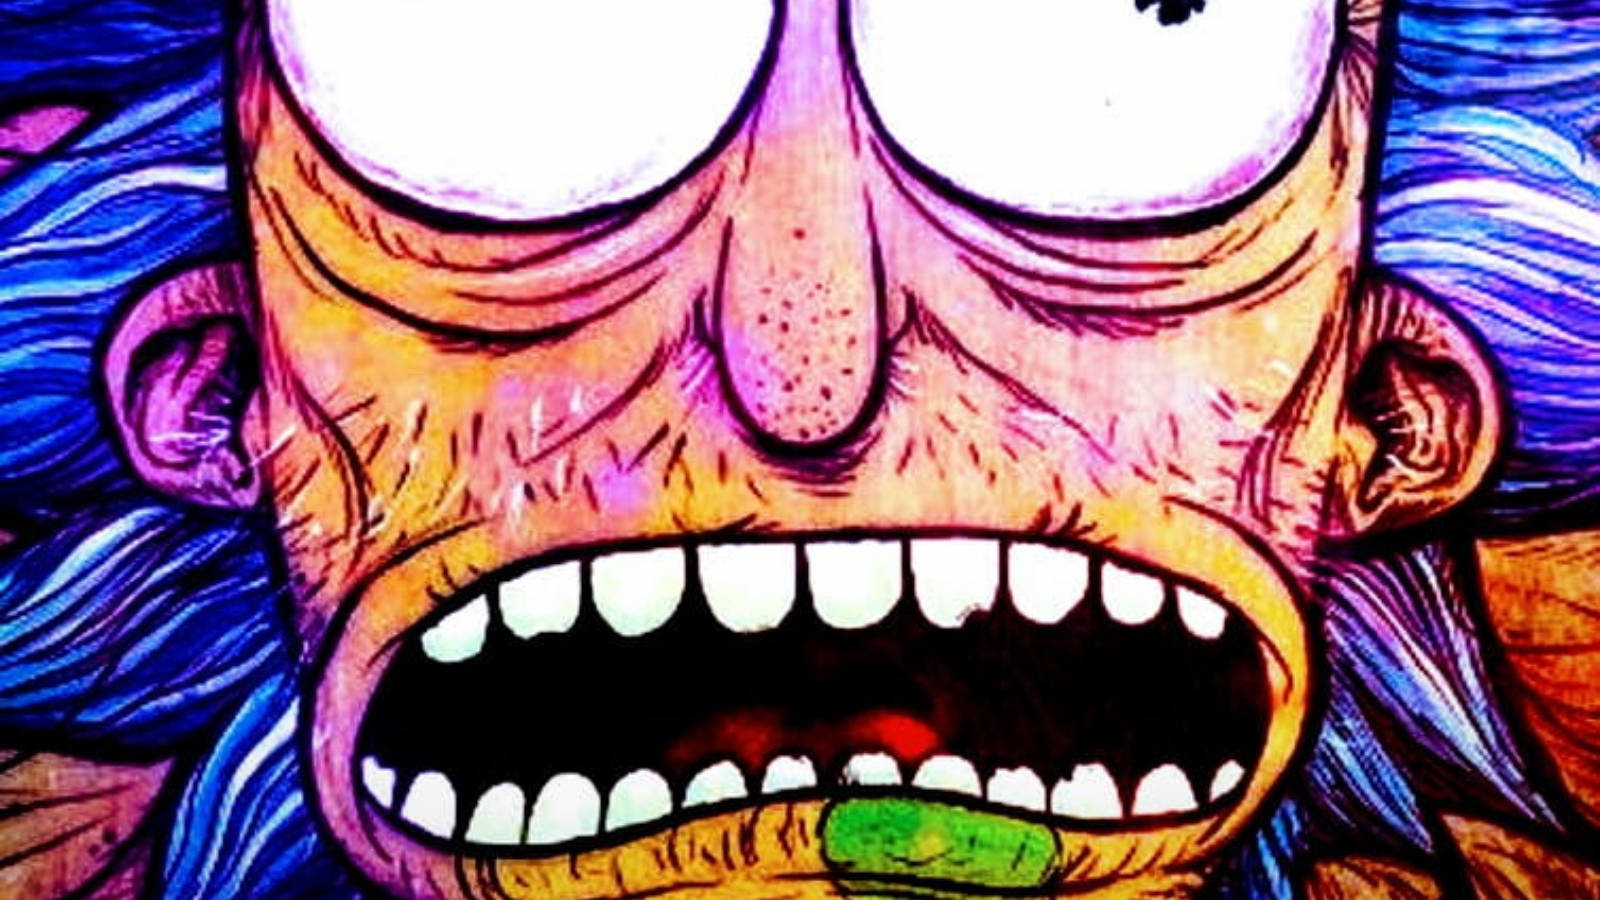 Closeup Rick And Morty Trippy Image